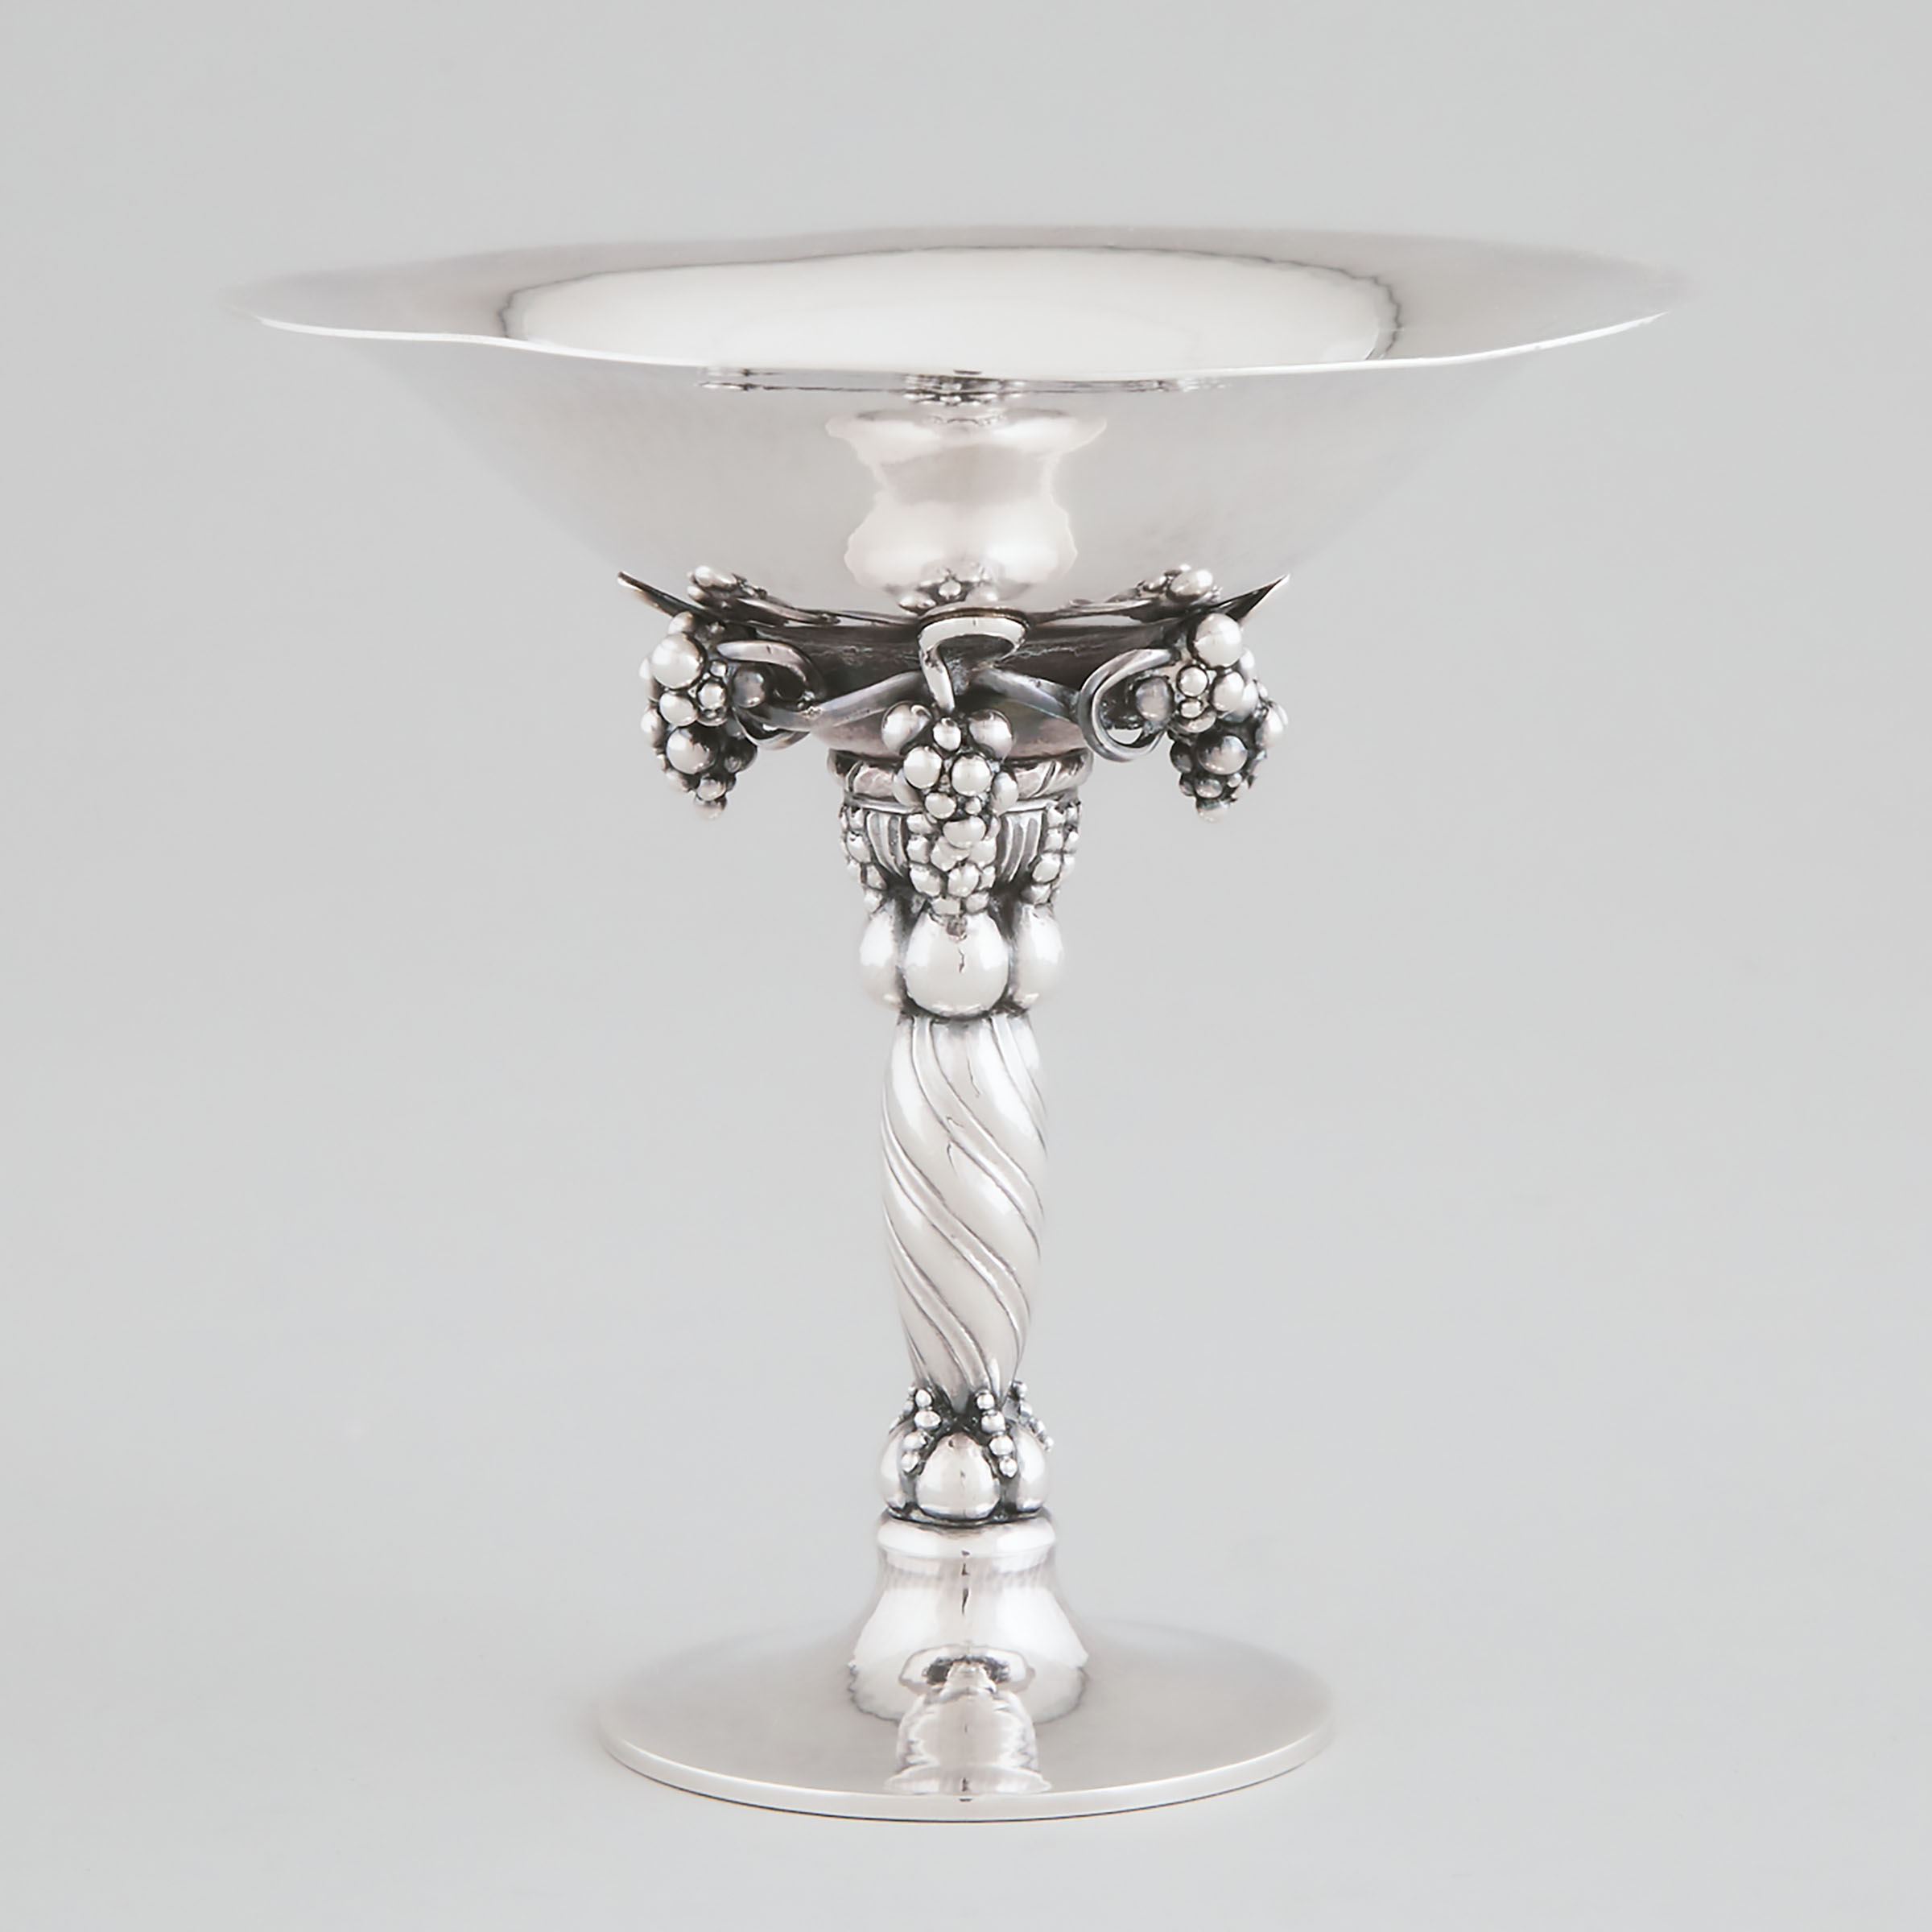 Danish Silver Pedestal Footed Comport  3ac311